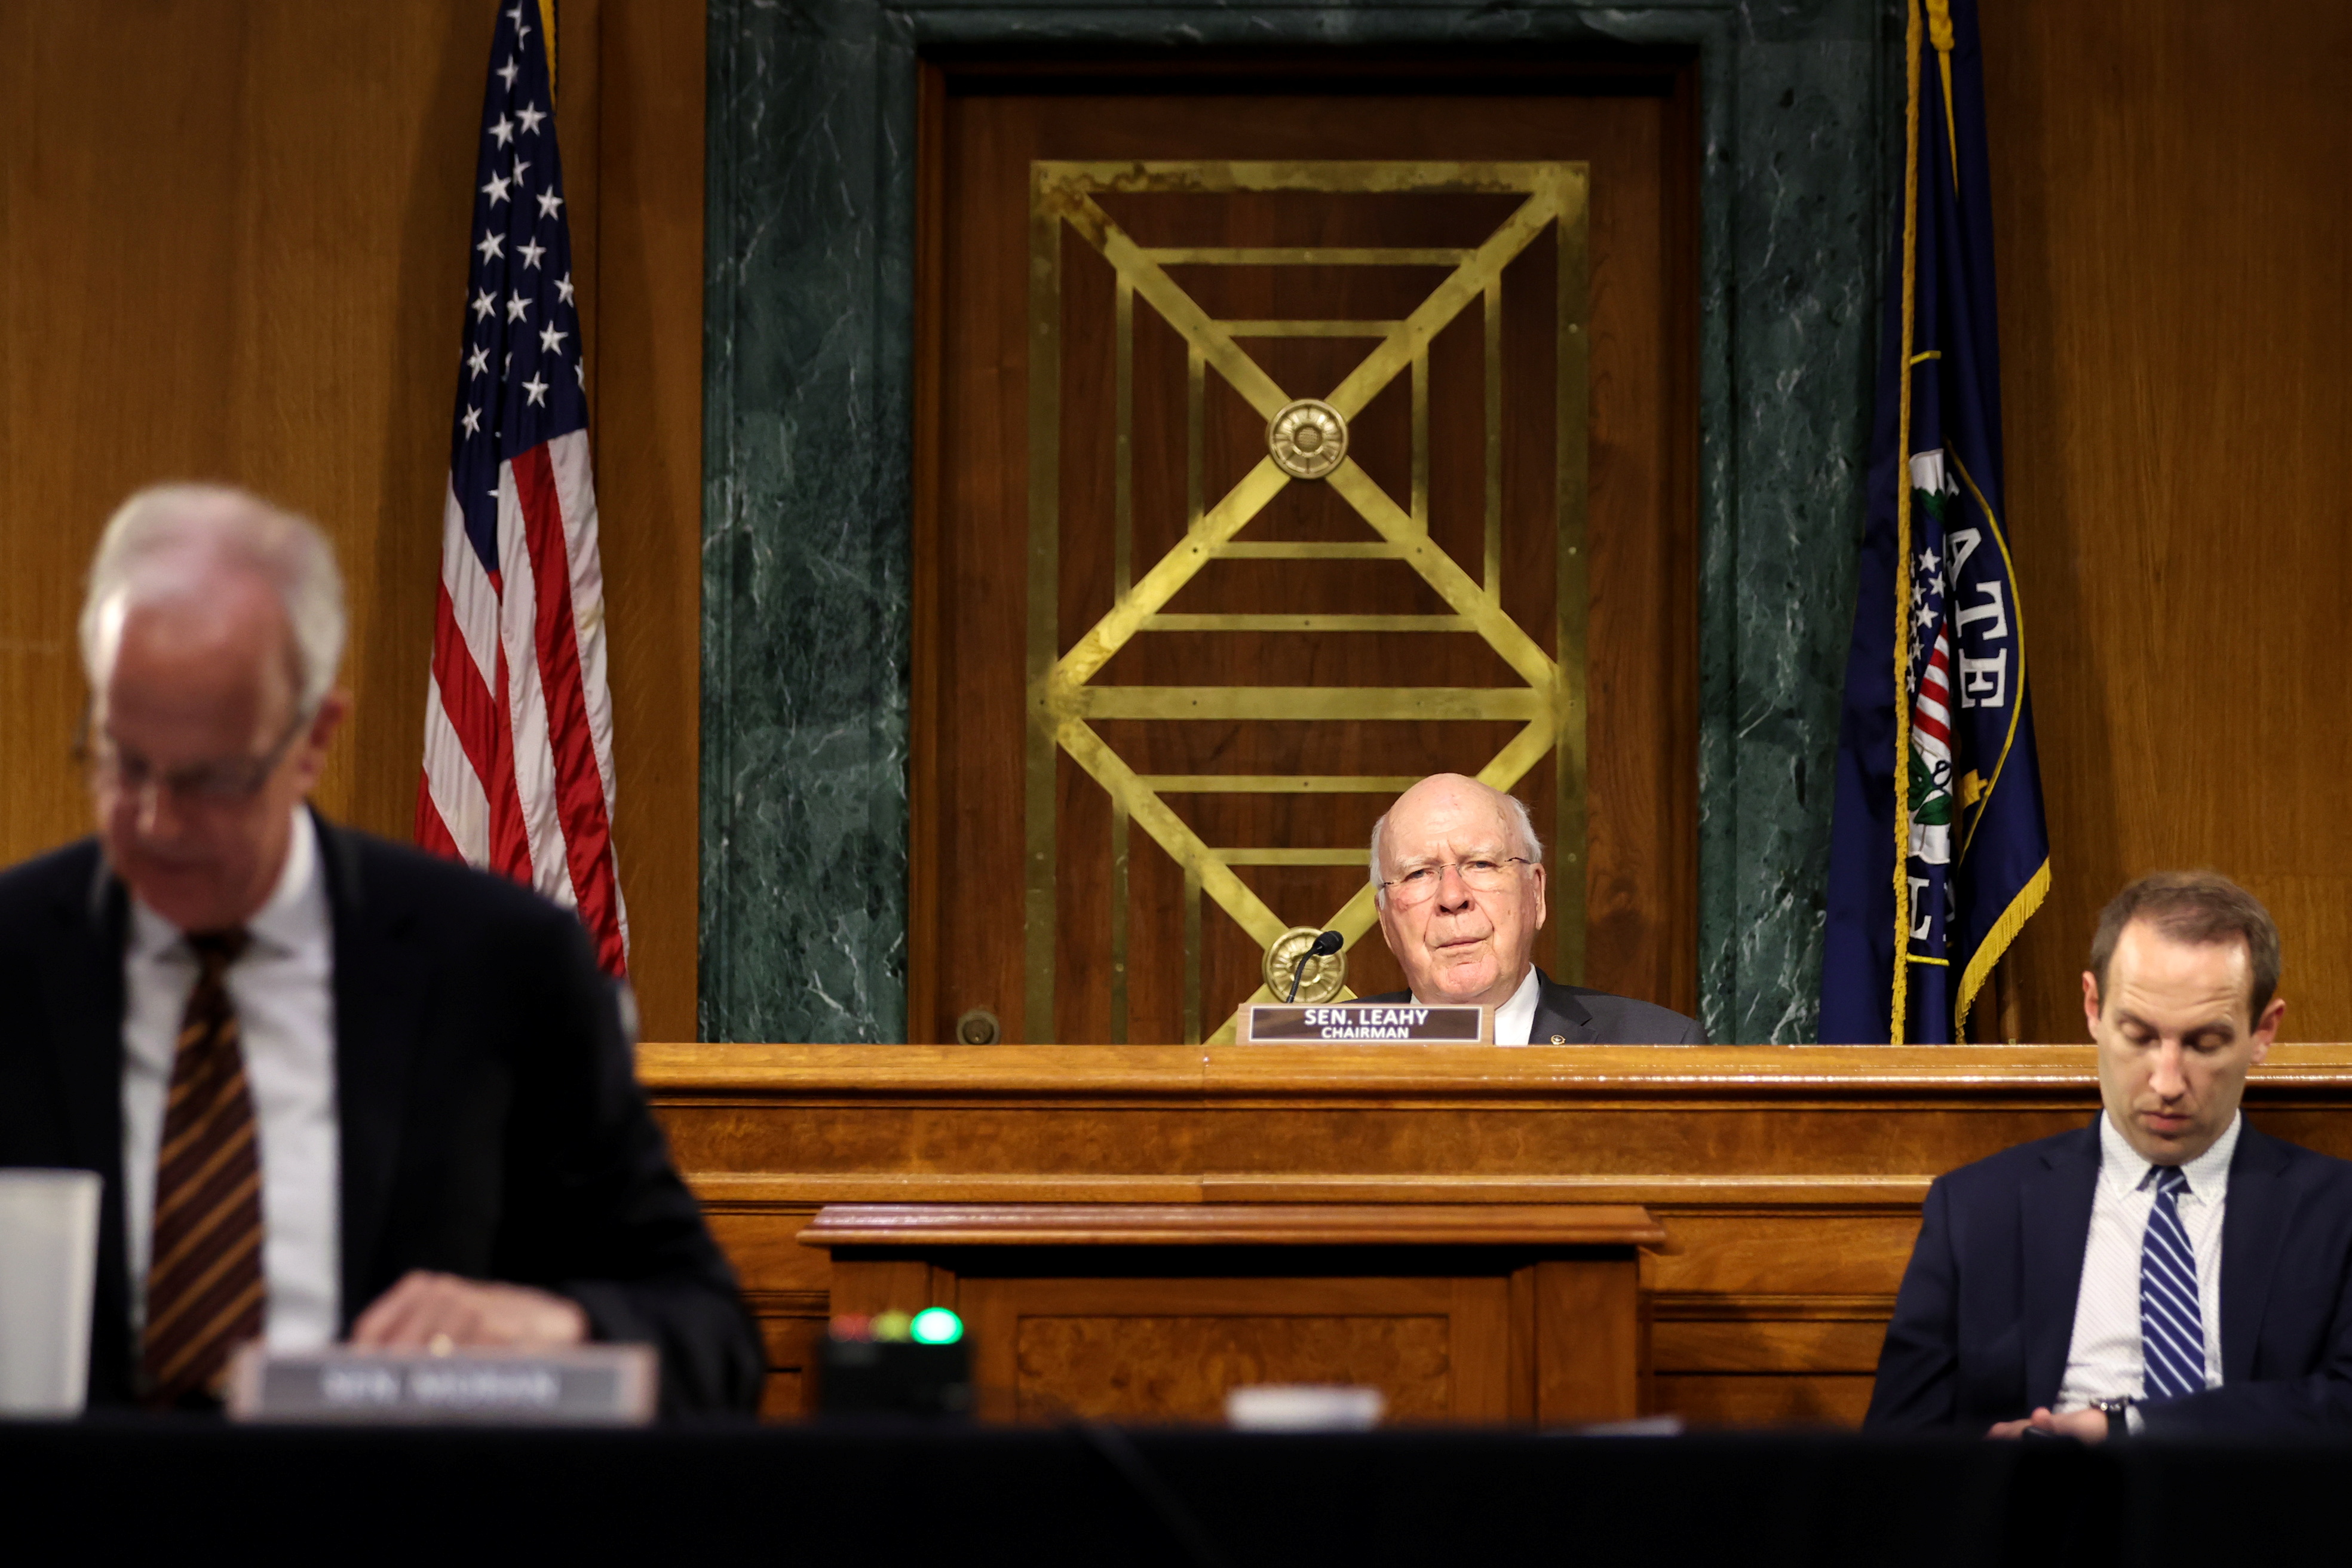 Committee Chairman U.S. Senator Pat Leahy (D-VT) presides as Secretary of State Antony Blinken testifies about the State Department budget before the Senate Appropriations Committee on Capitol Hill in Washington, U.S. June 8, 2021.  REUTERS/Jonathan Ernst